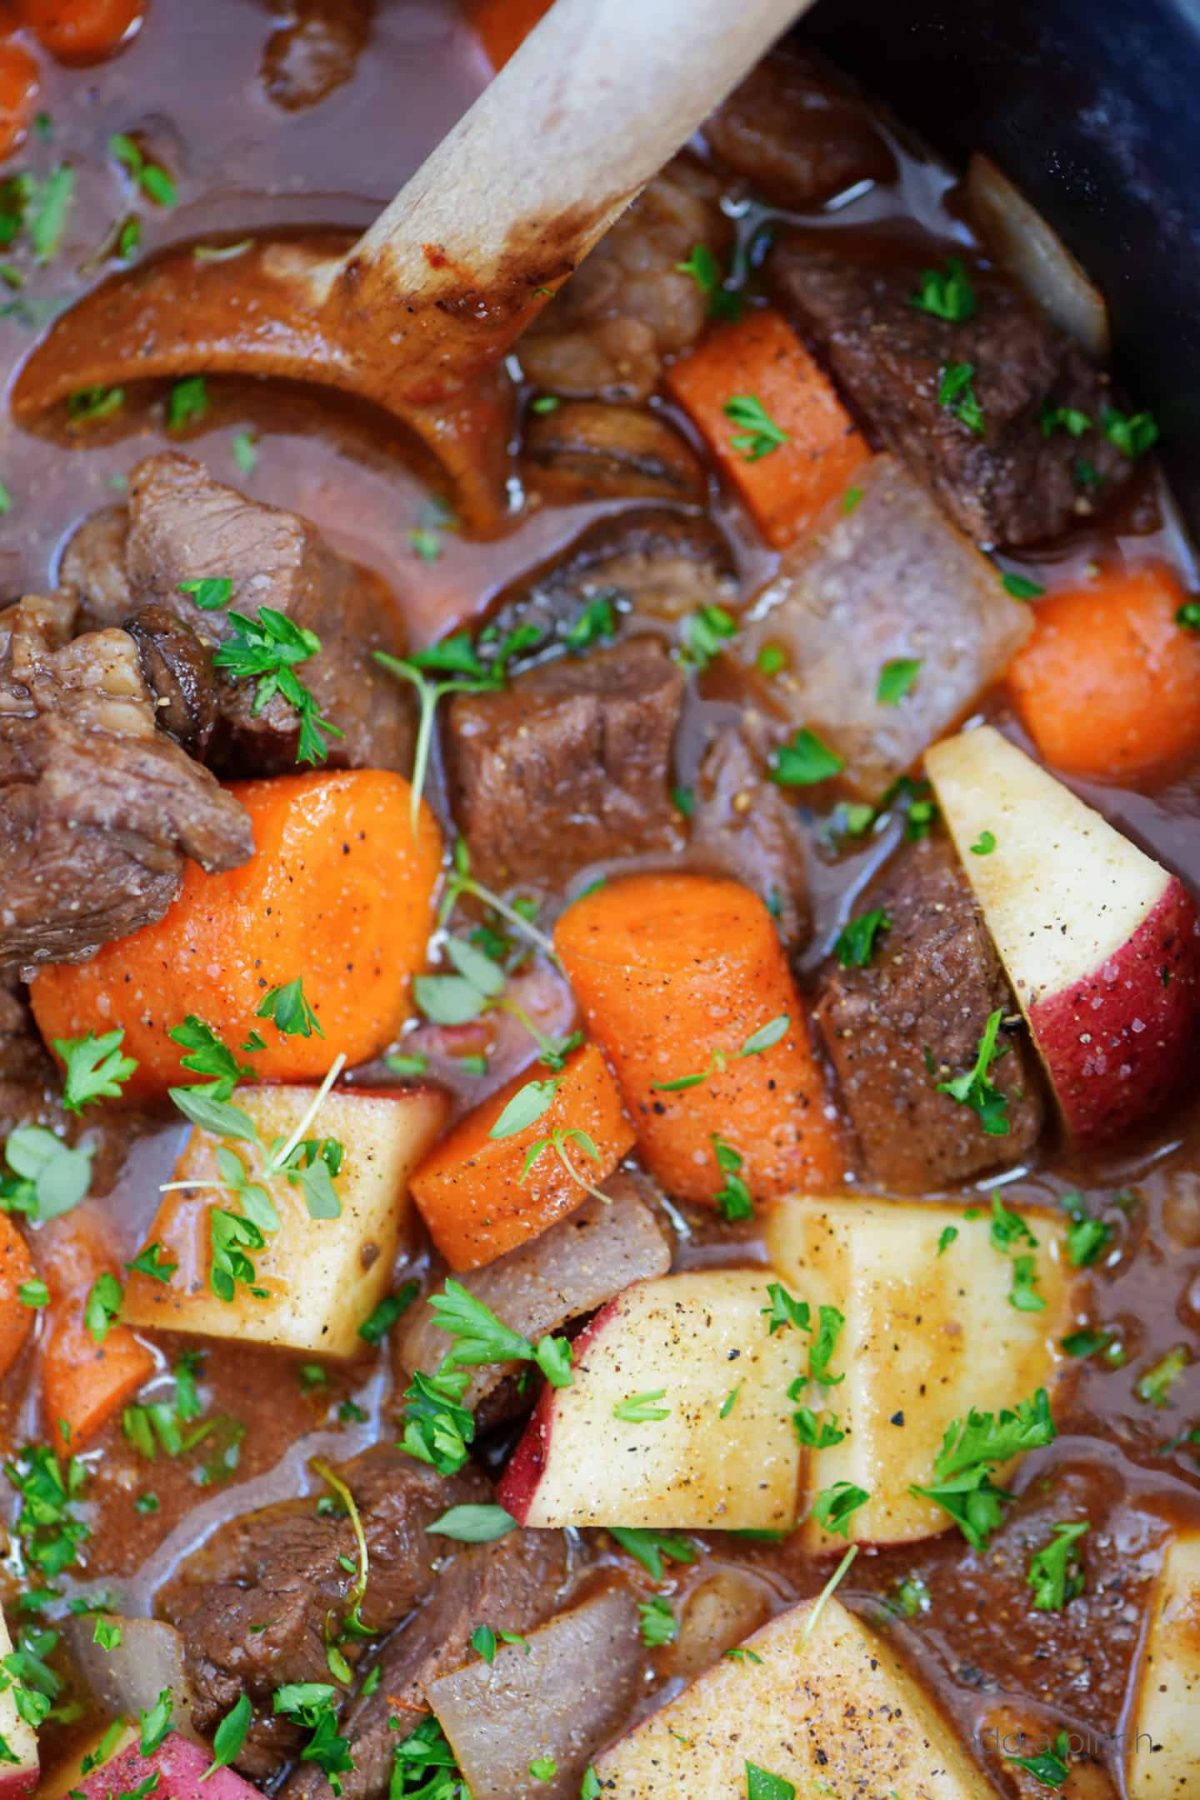 Slow Cooker Beef Bourguignon Recipe - Add a Pinch